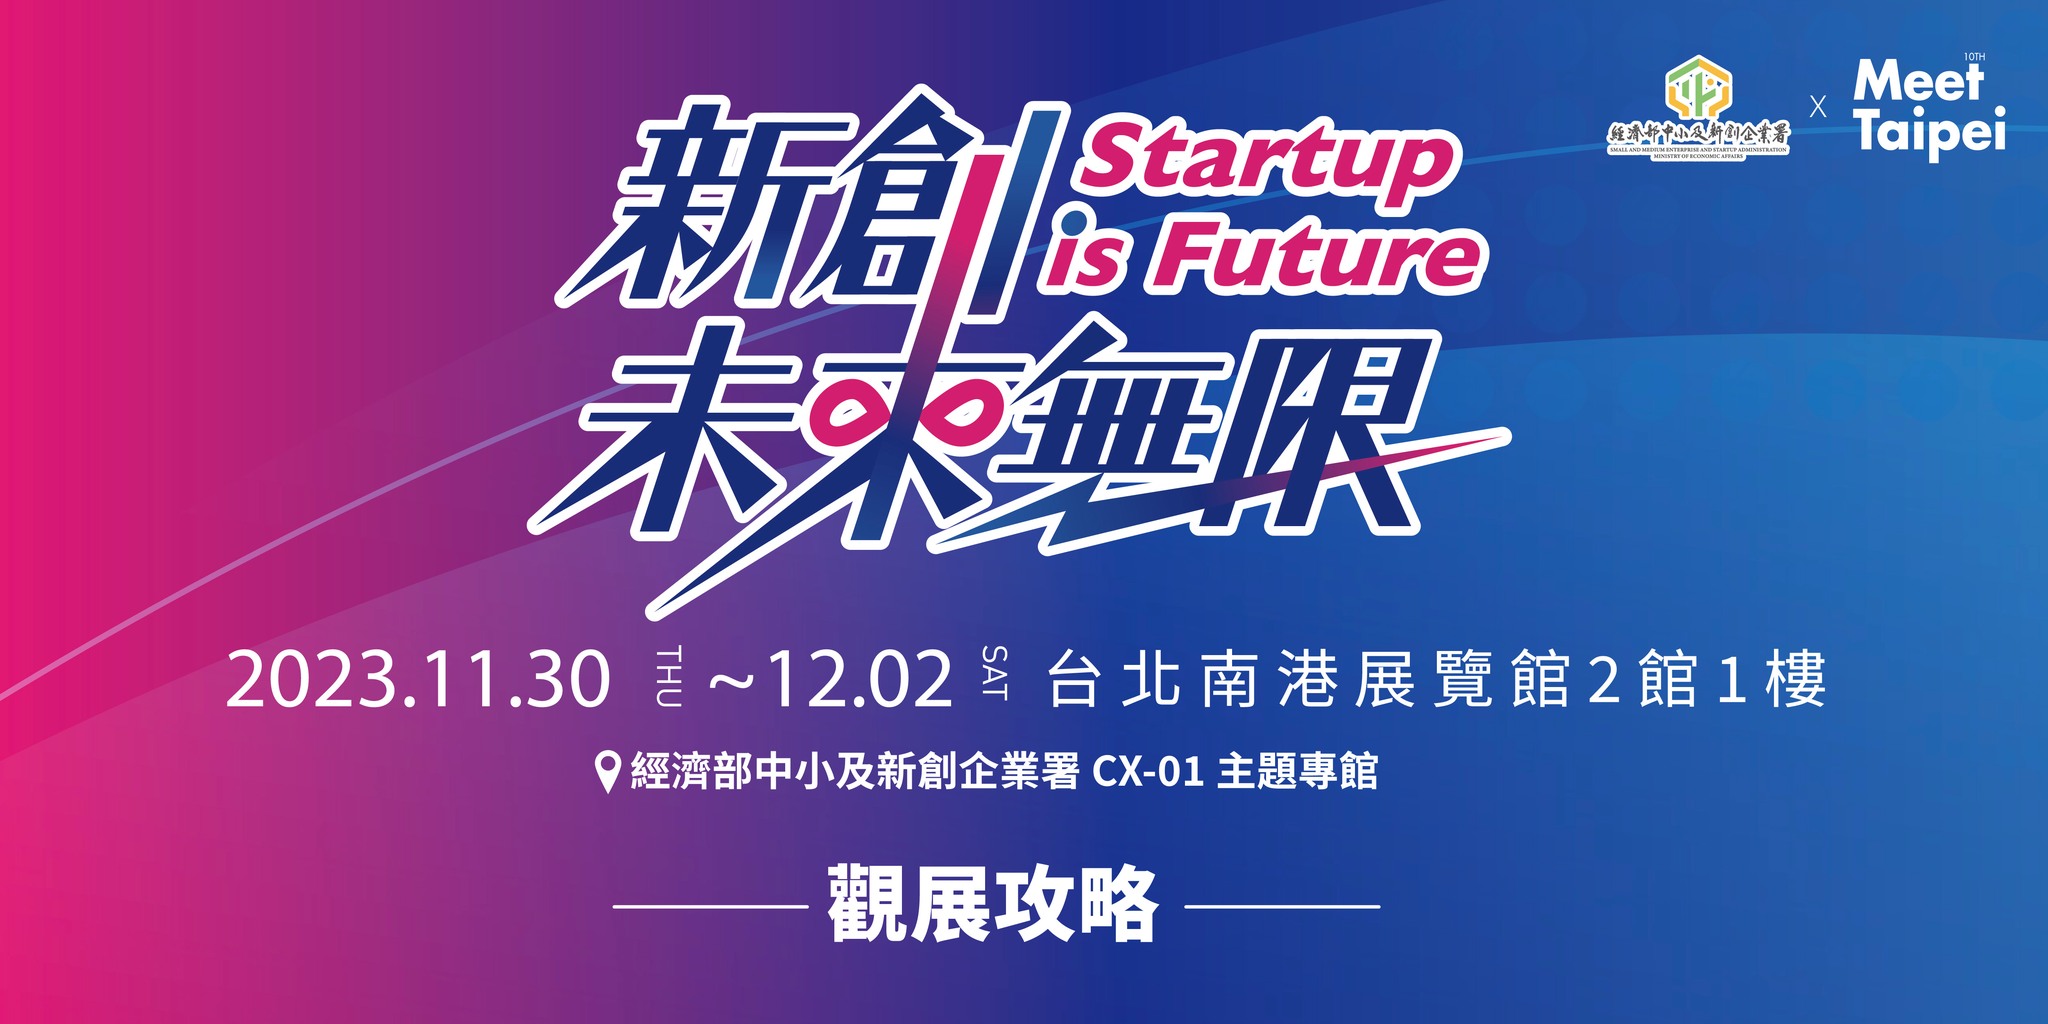 “Startup is Future” Pavilion supported by SMESA @Meet Taipei is coming soon!